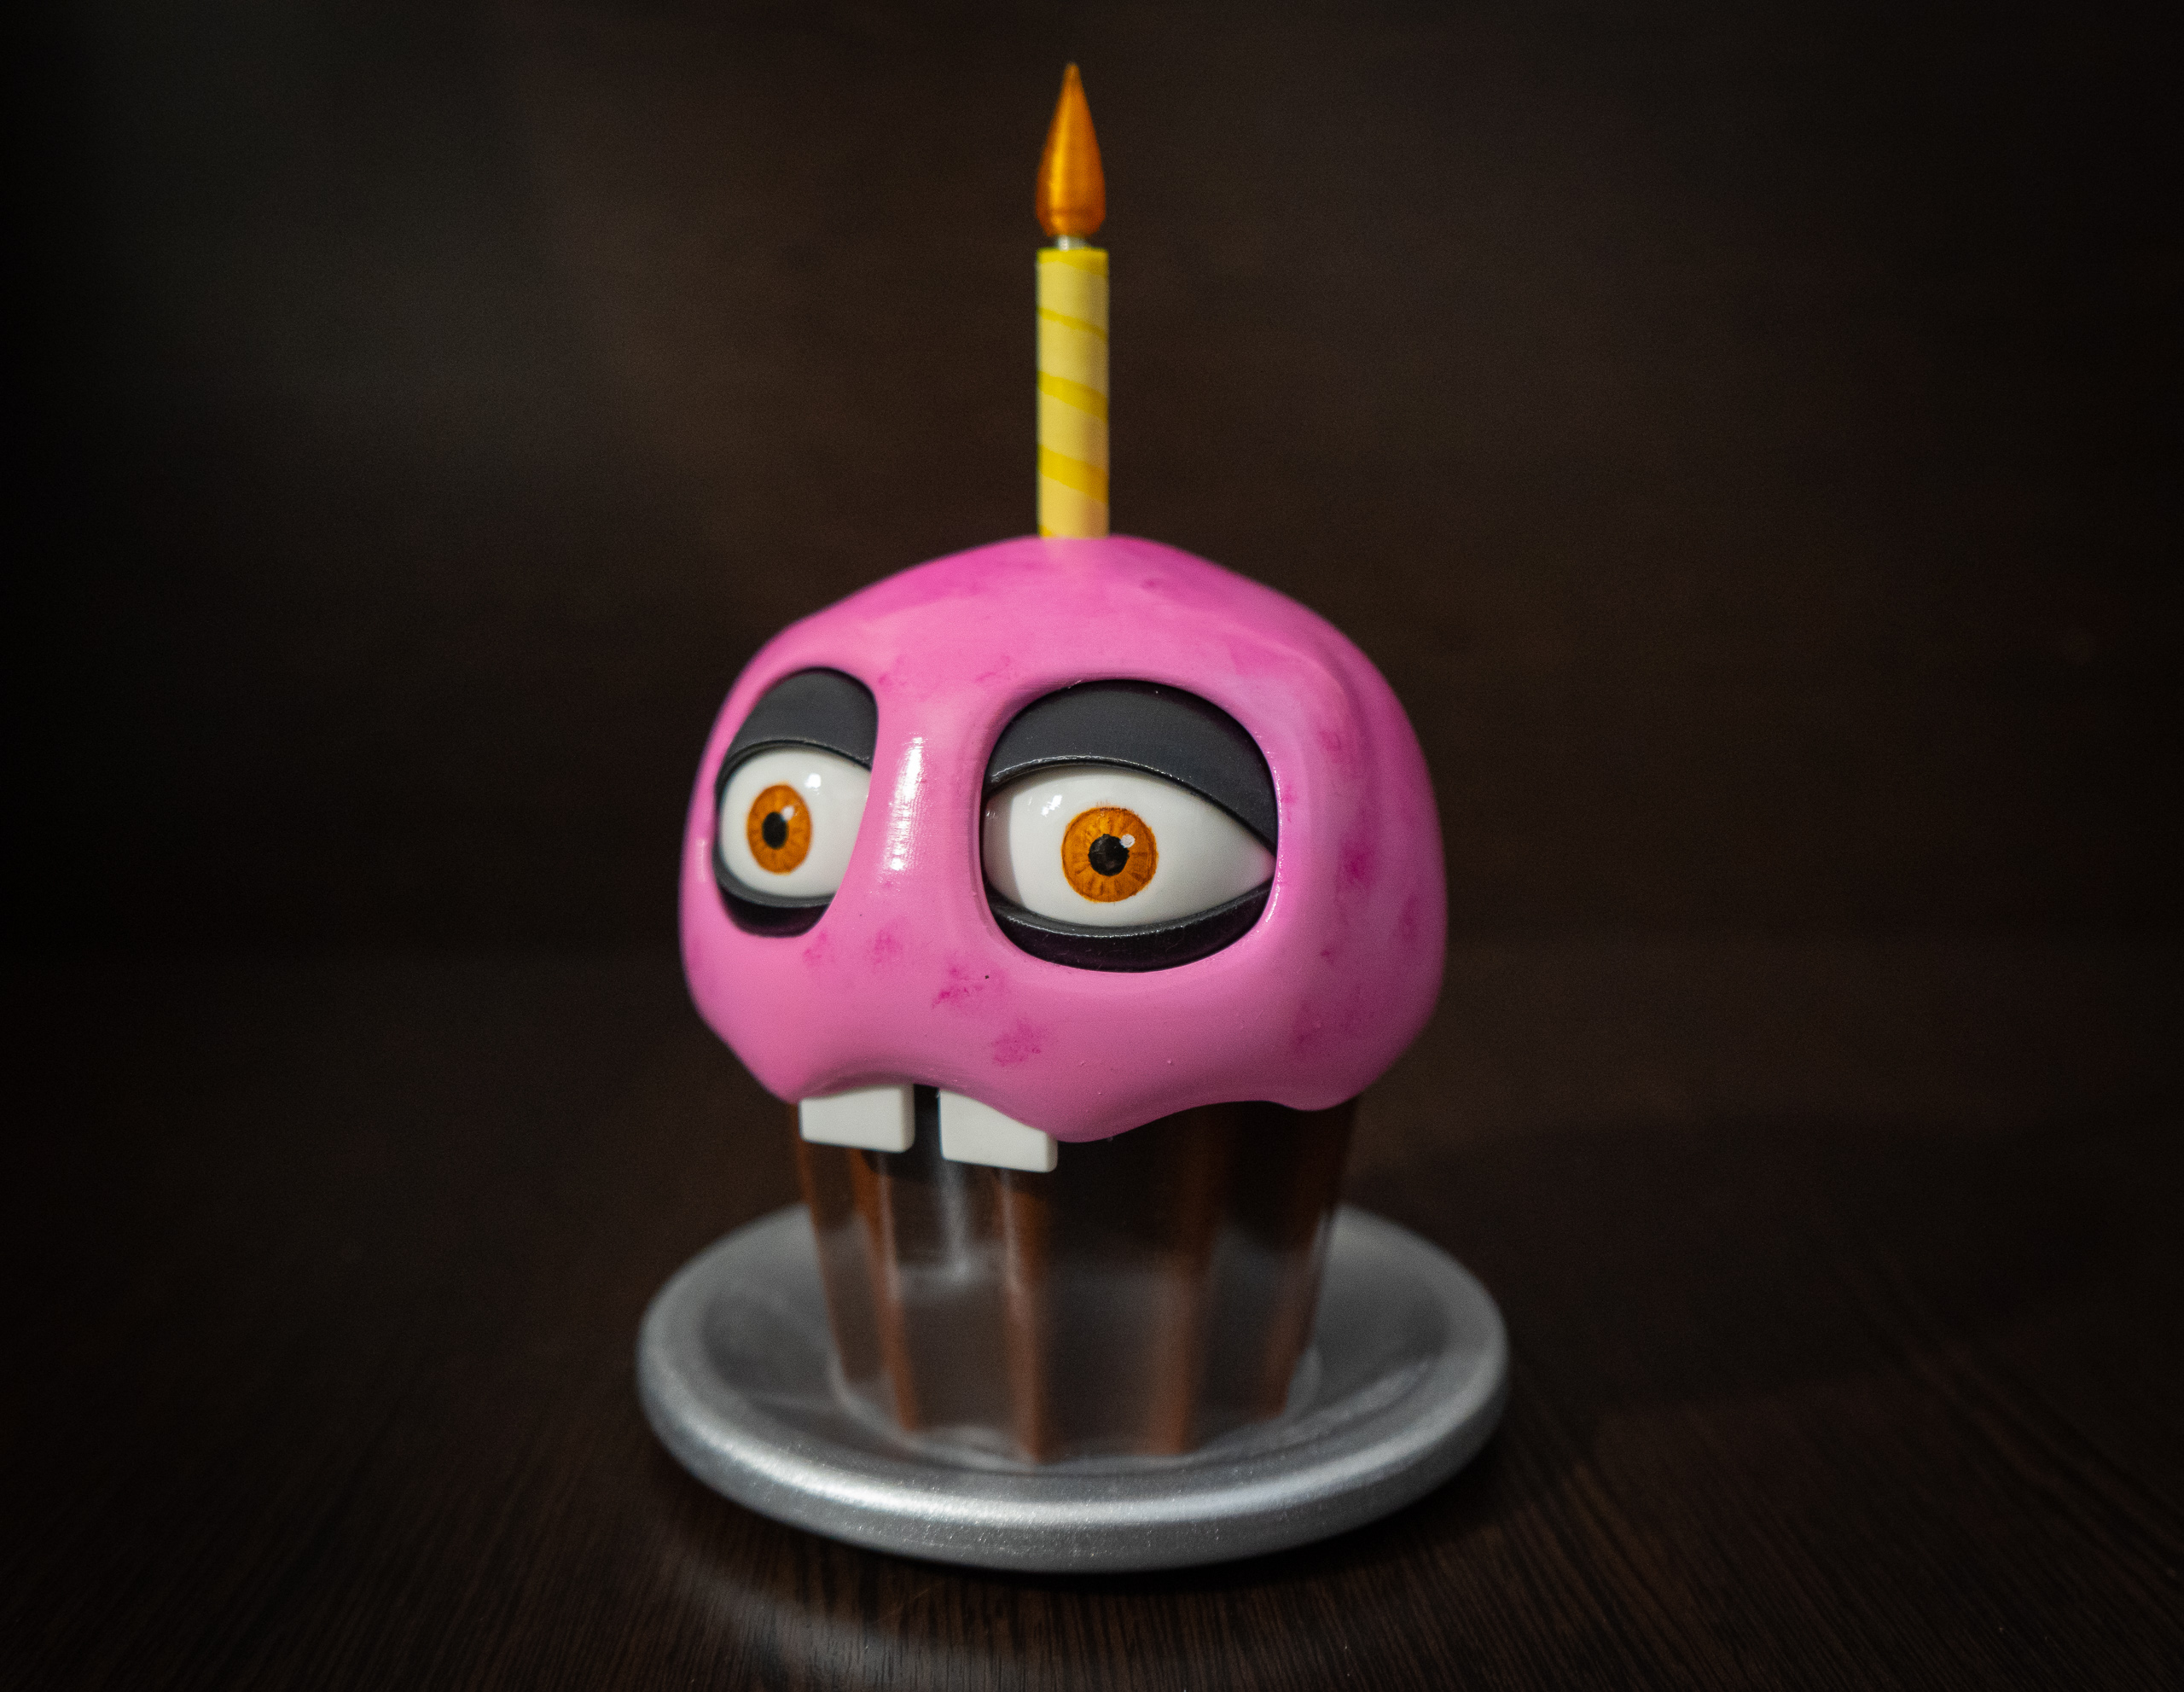 Mr. Cupcake (aka Carl) from Five Nights at Freddy's Explained